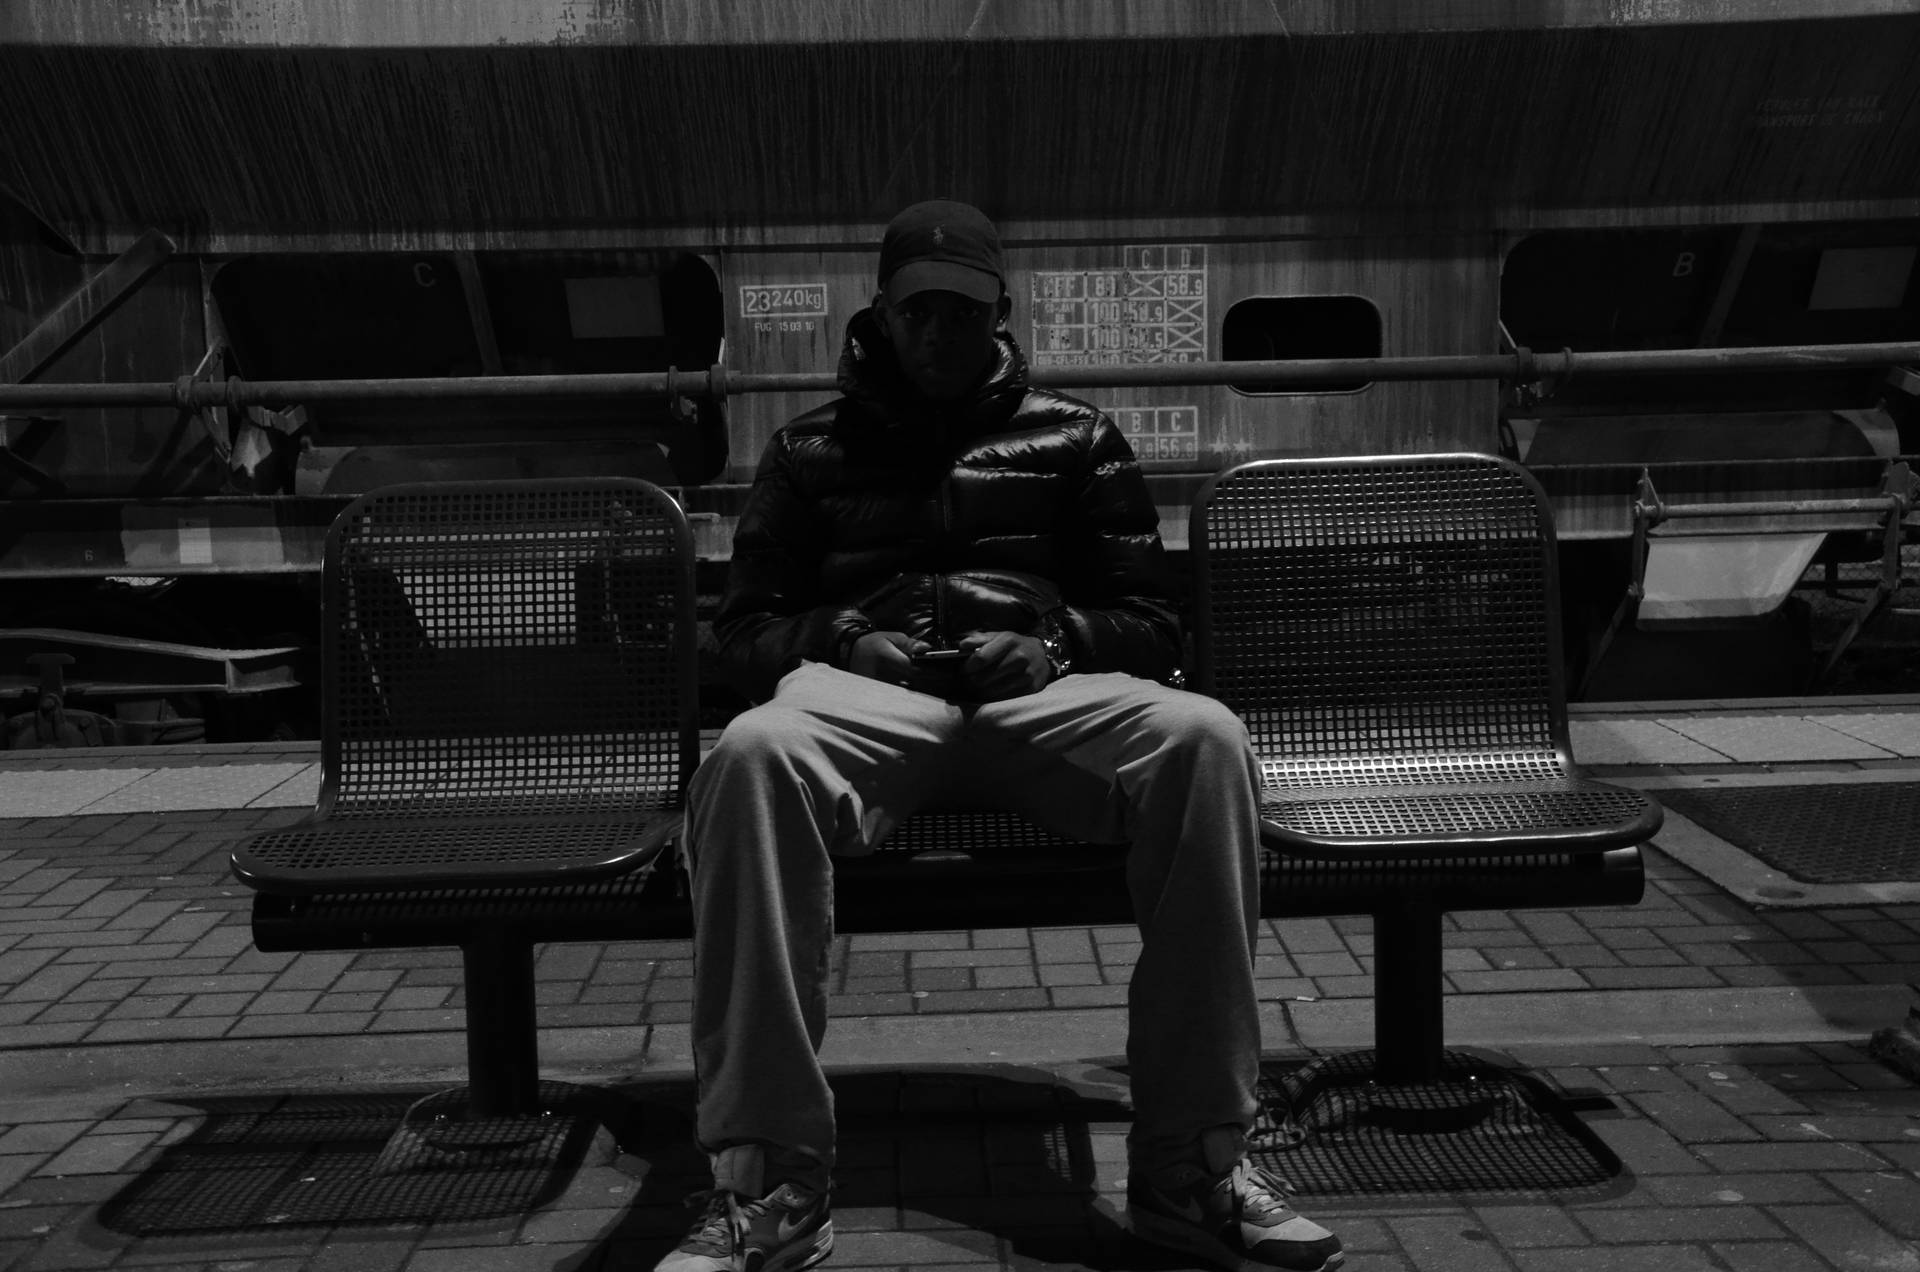 Caption: "Exhausted man resting on a bus bench." Wallpaper